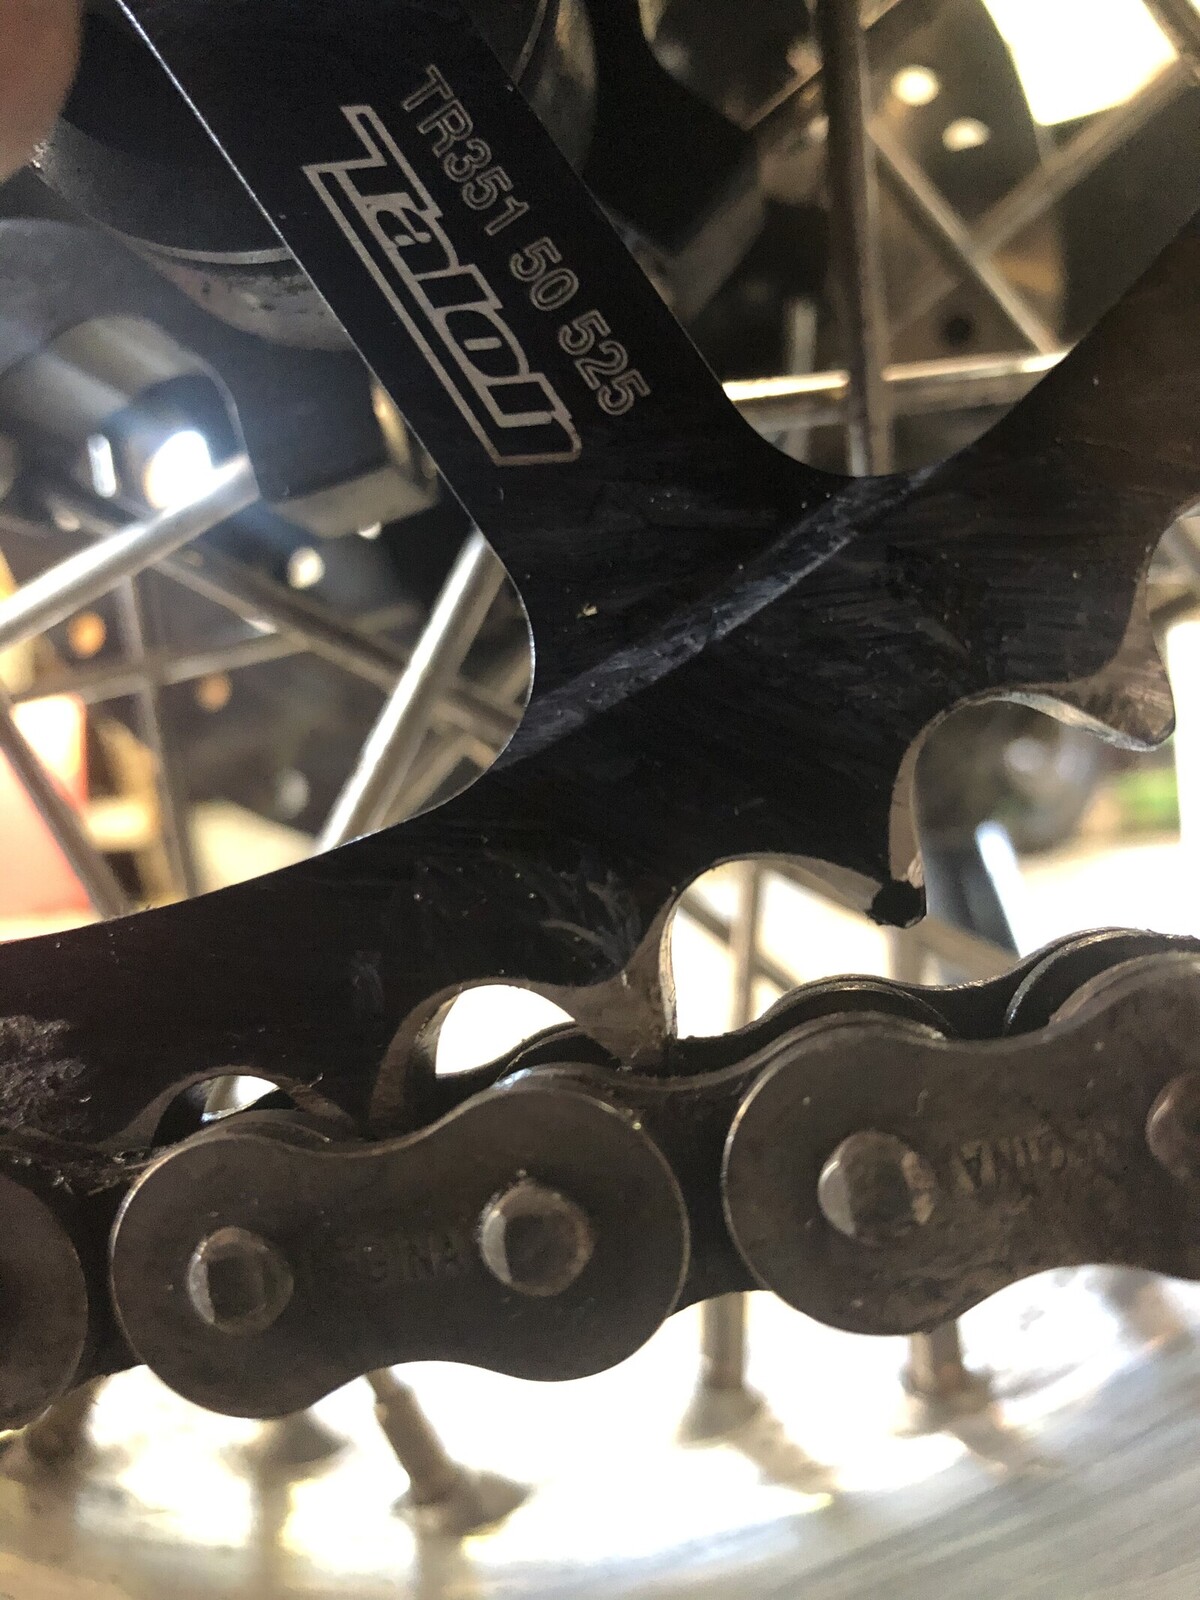 Regina ZRP Drive Chain worn out after 16,000 miles